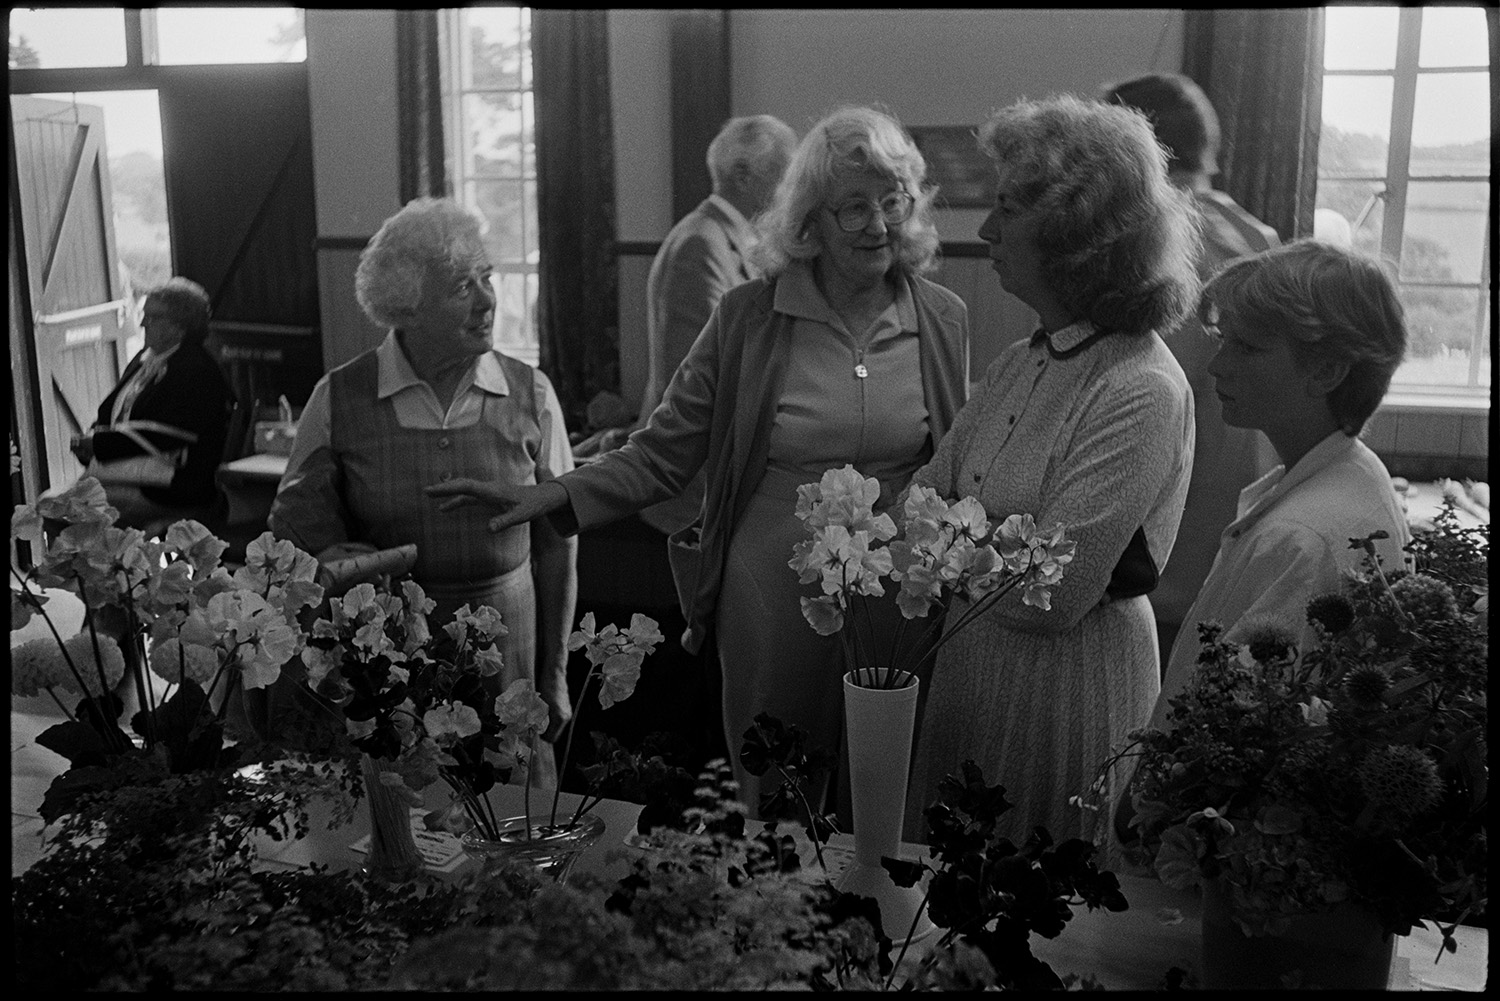 Flower show exhibits, village hall, flowers, jam, vegetables, prize winner with cup.
[Women looking at floral displays and exhibits at the Flower Show in Dolton Village Hall.]